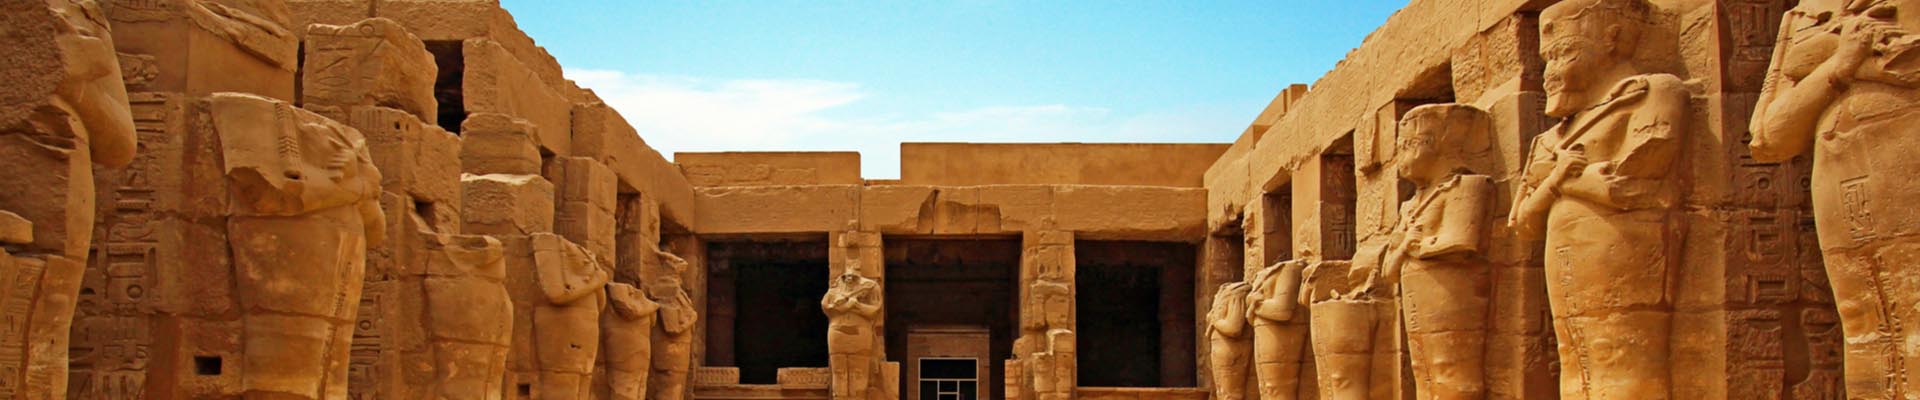 14 Day Israel, Jordan & Egypt Private Tour with Luxor